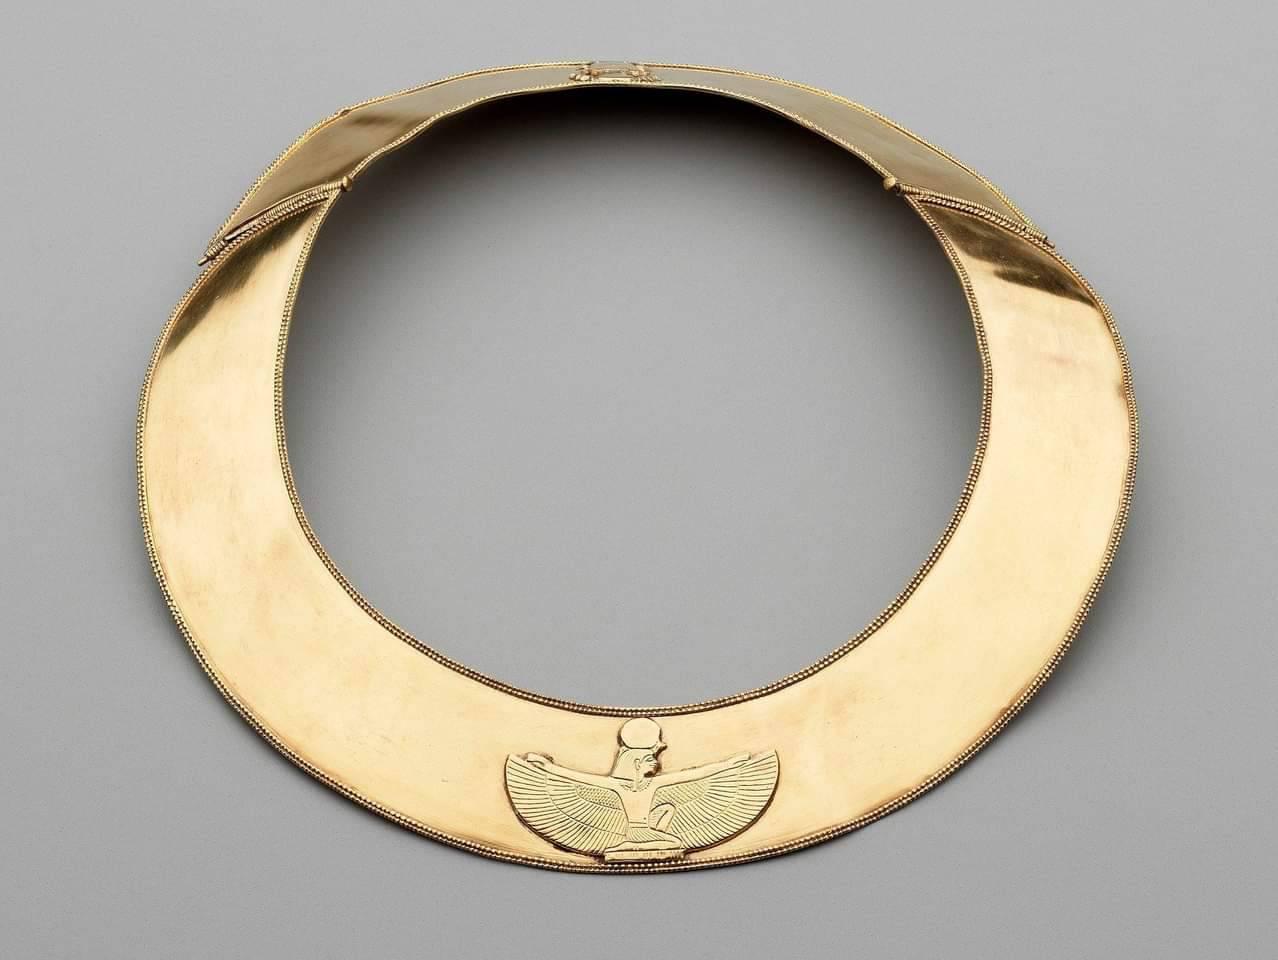 Egyptian solid gold collar (hinged) found in the tomb of an unidentified queen of King Shabako, who reigned circa 712-698 BCE under the 25th Dynasty. Museum of Fine Arts, Boston.jpg